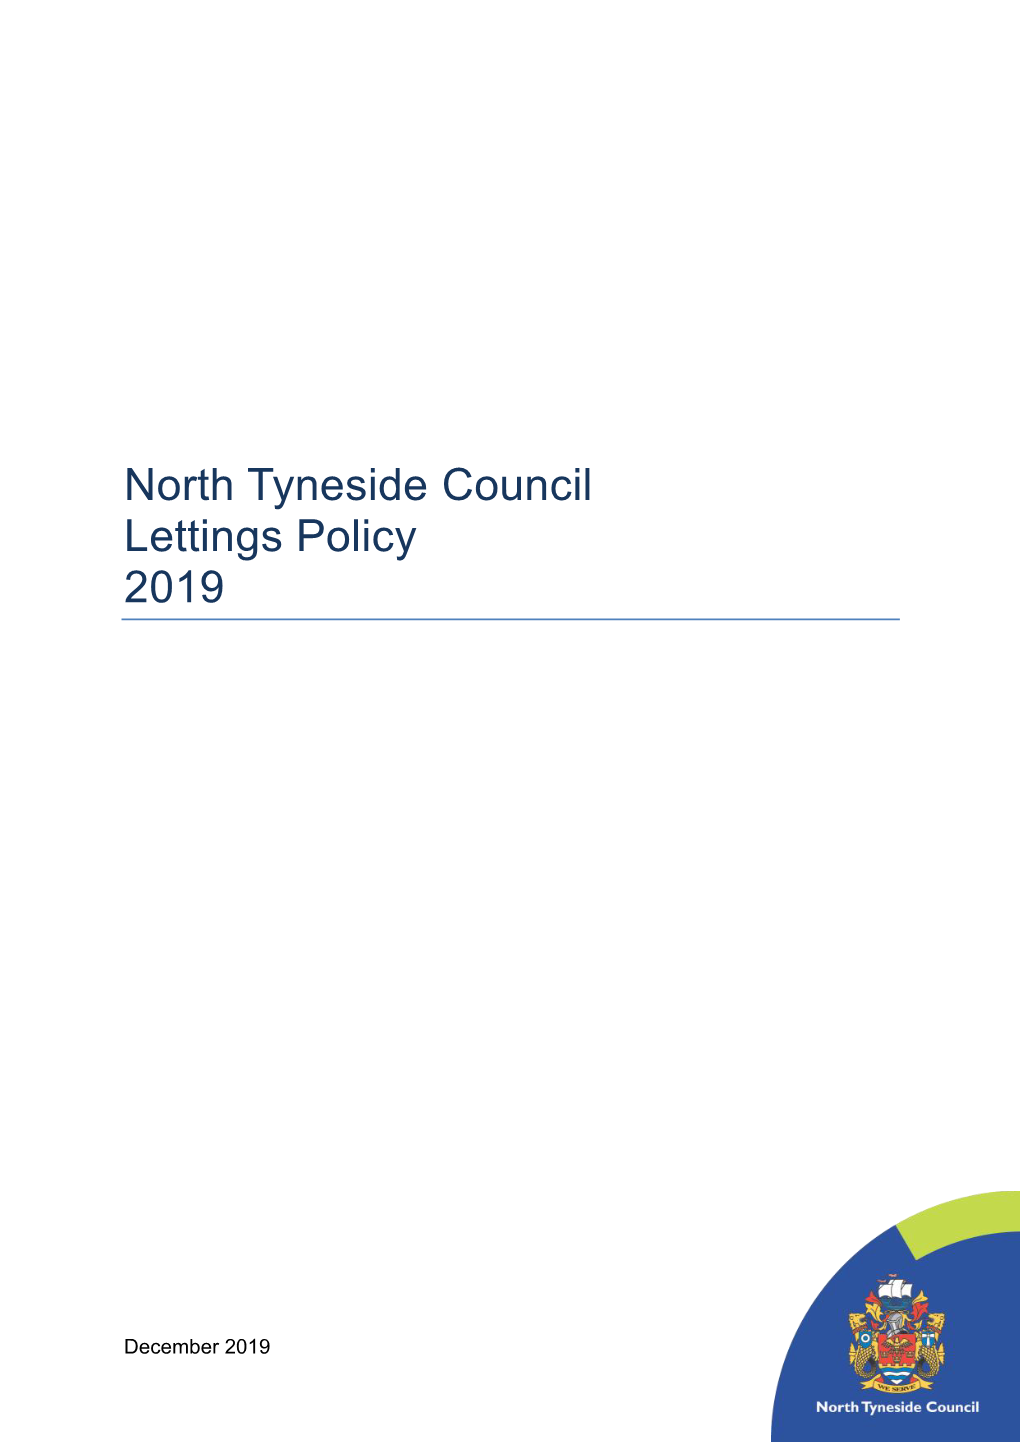 North Tyneside Council Lettings Policy 2019